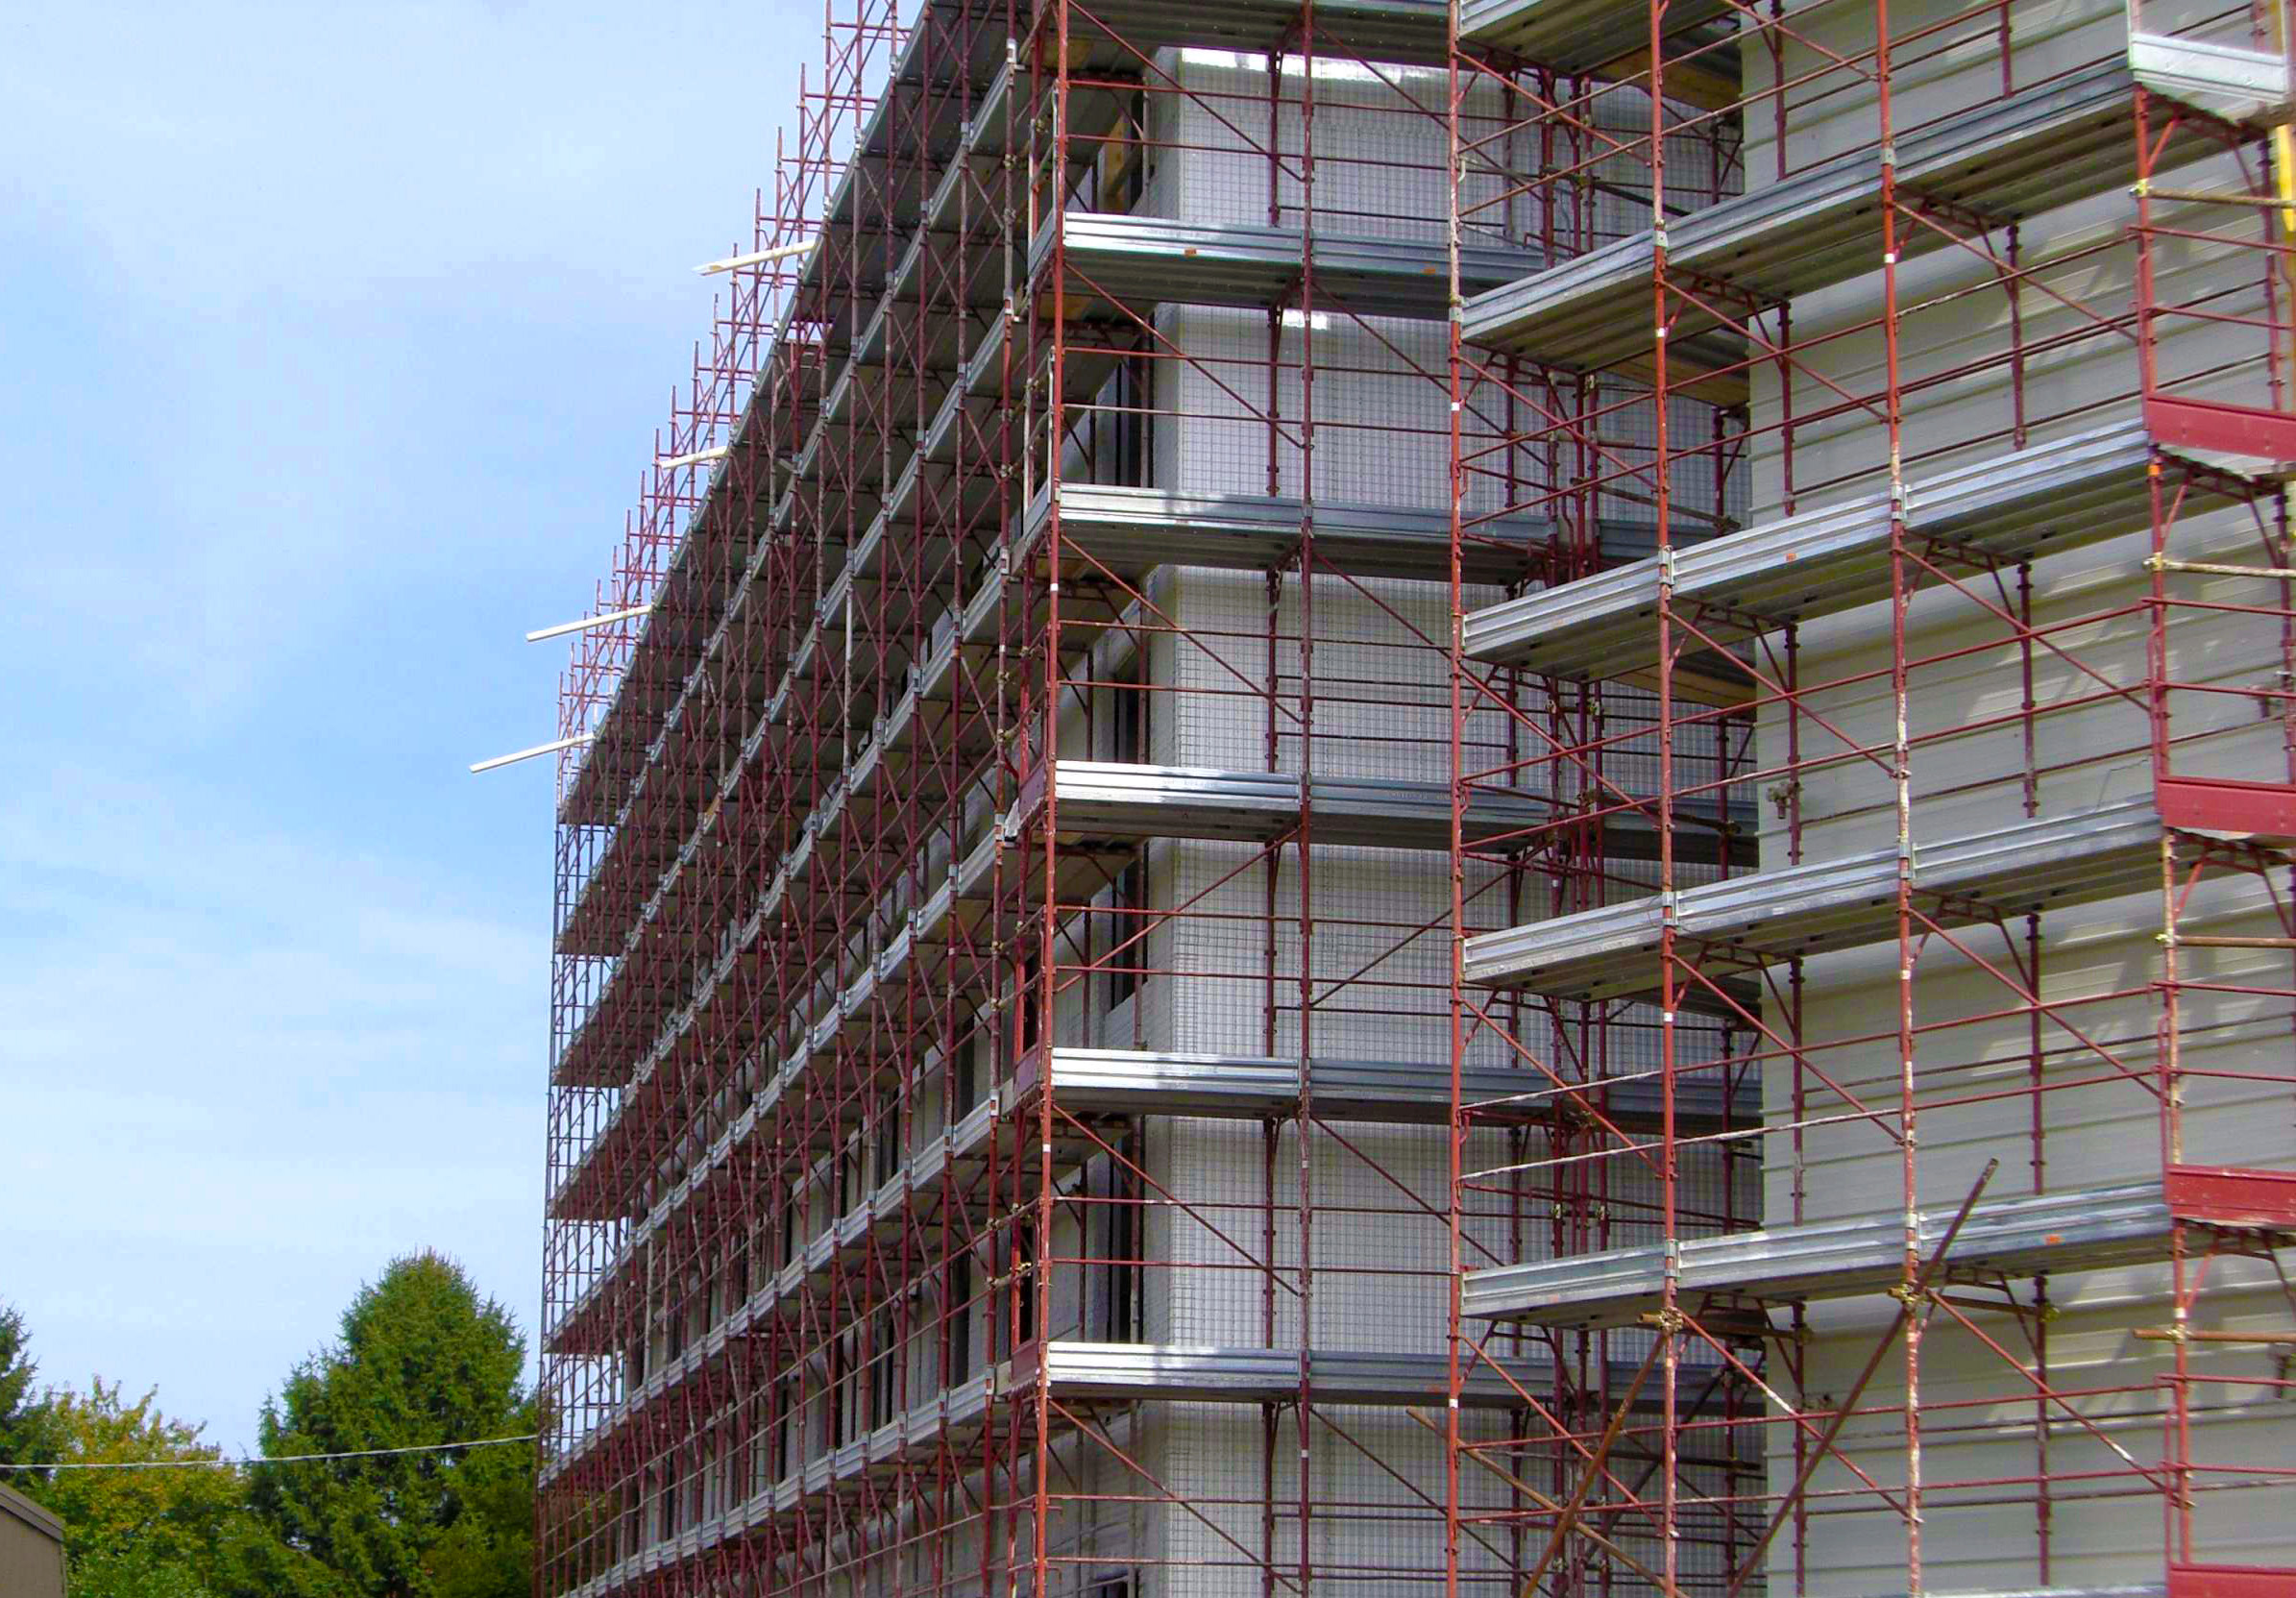 SCIP building system on multifamily building under construction